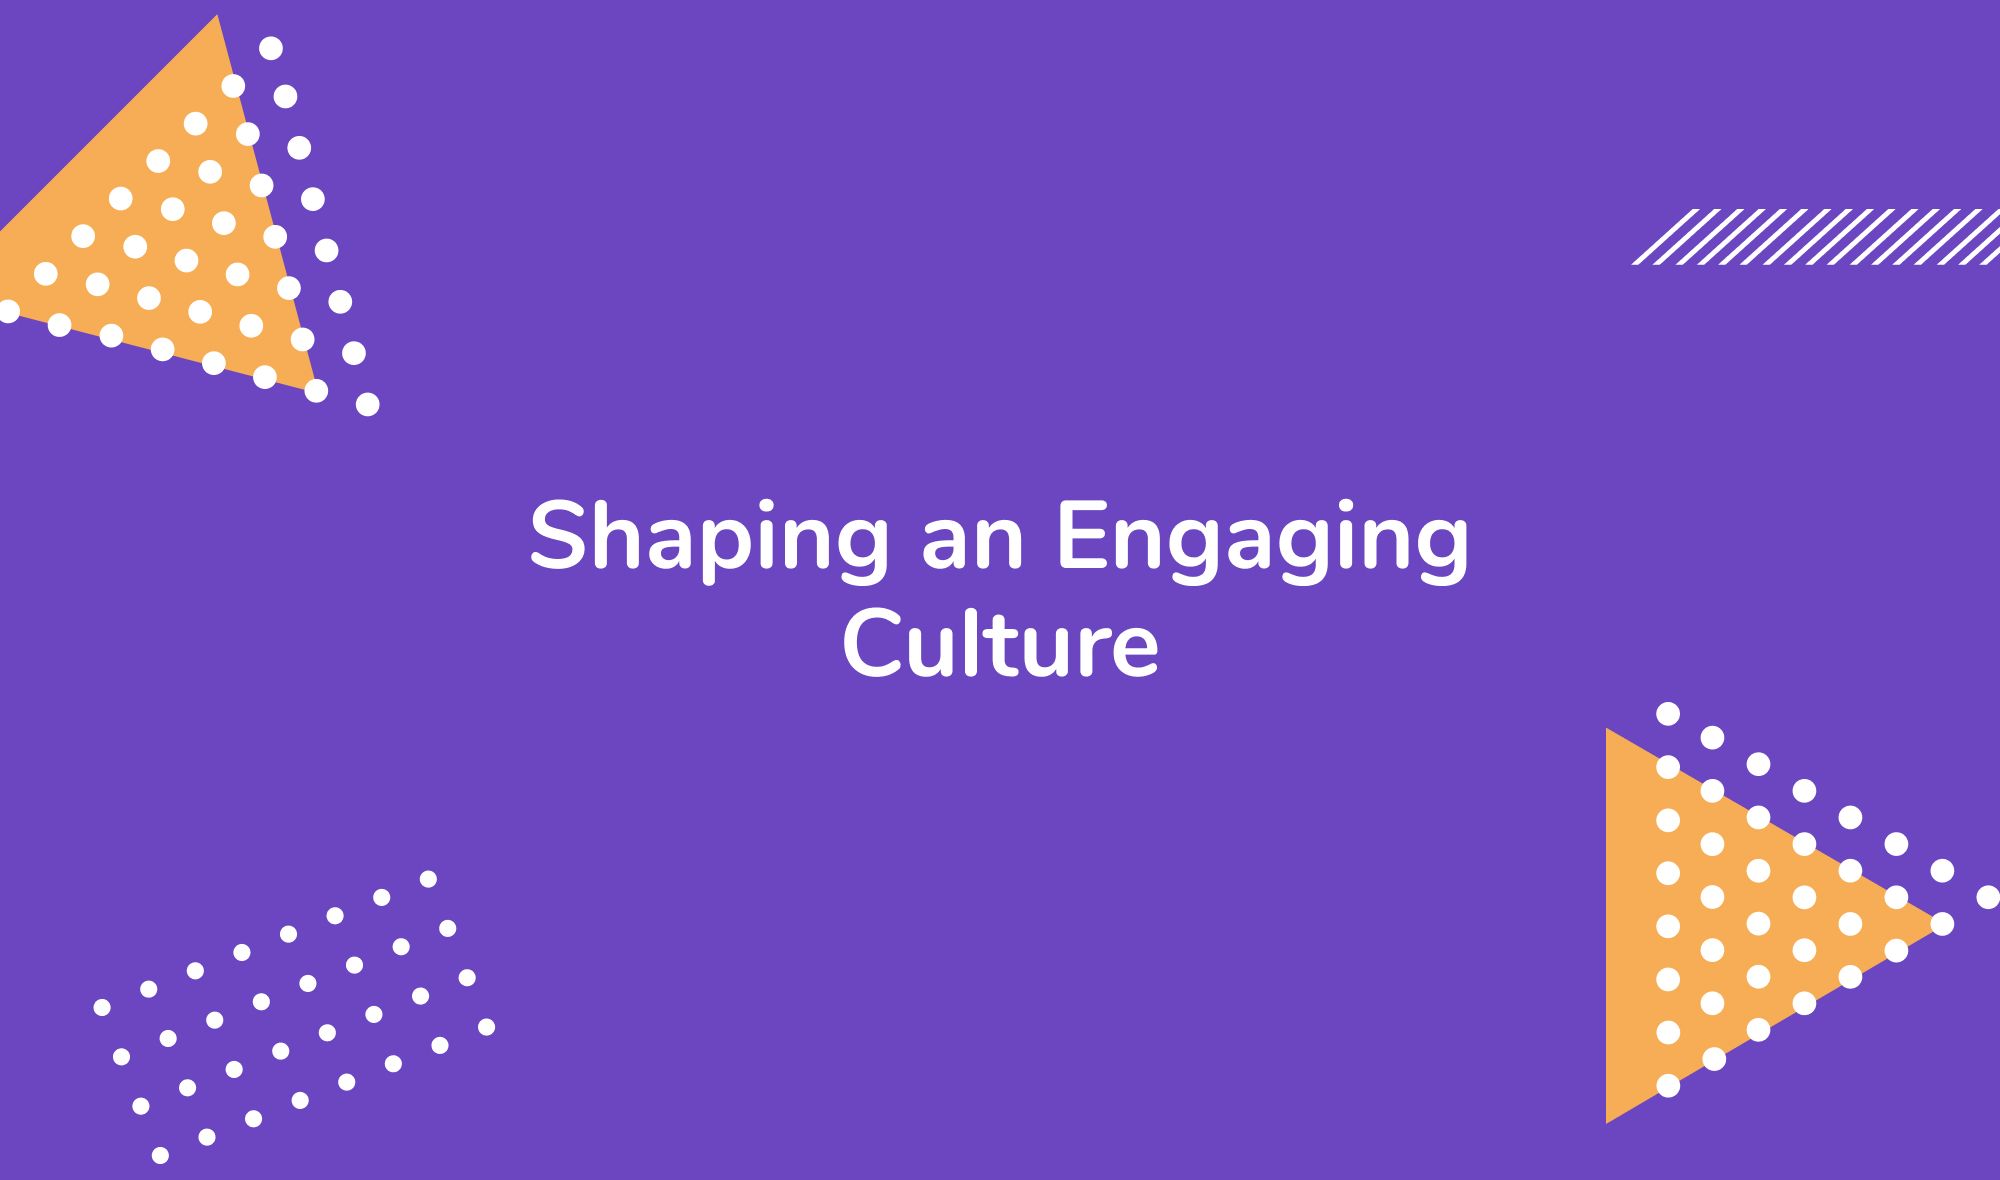 Shaping an Engaging Culture